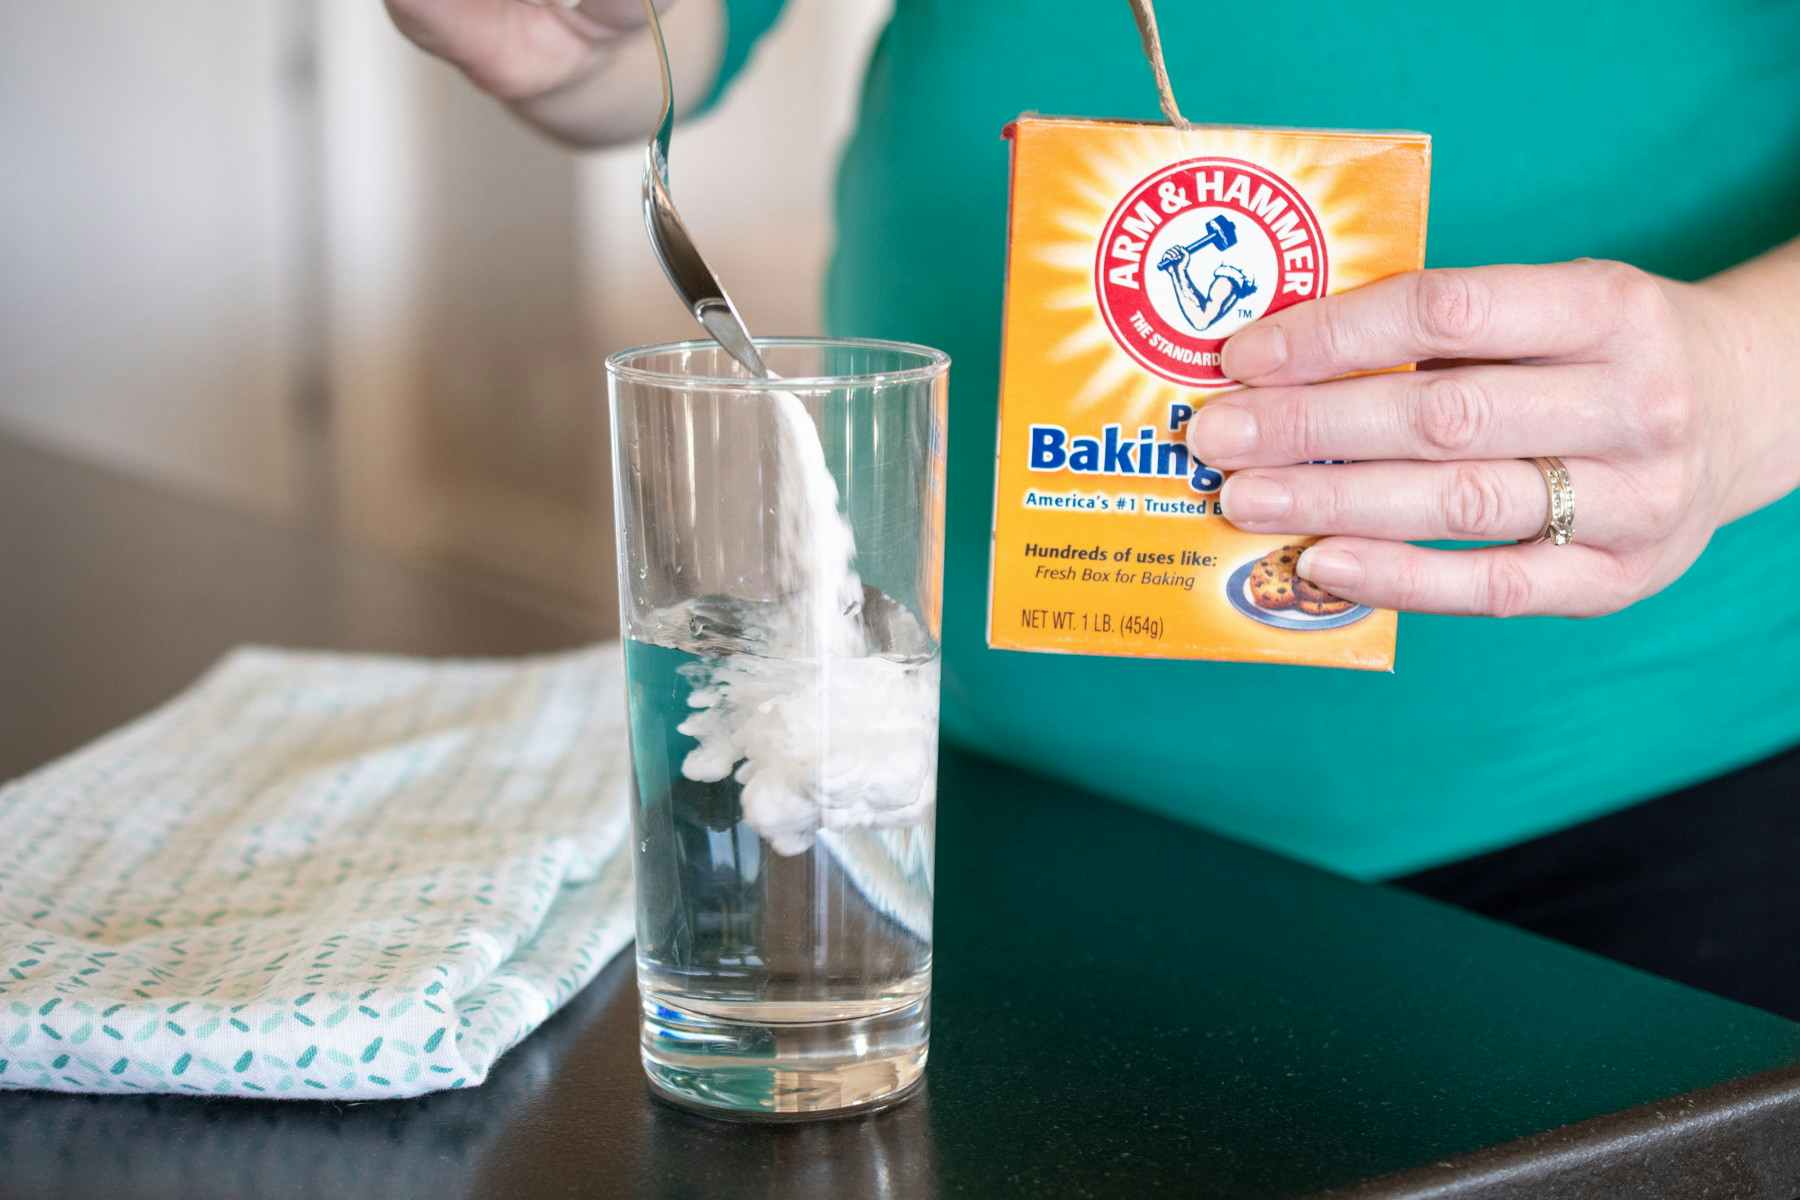 A pregnant woman putting baking soda into a glass of water.